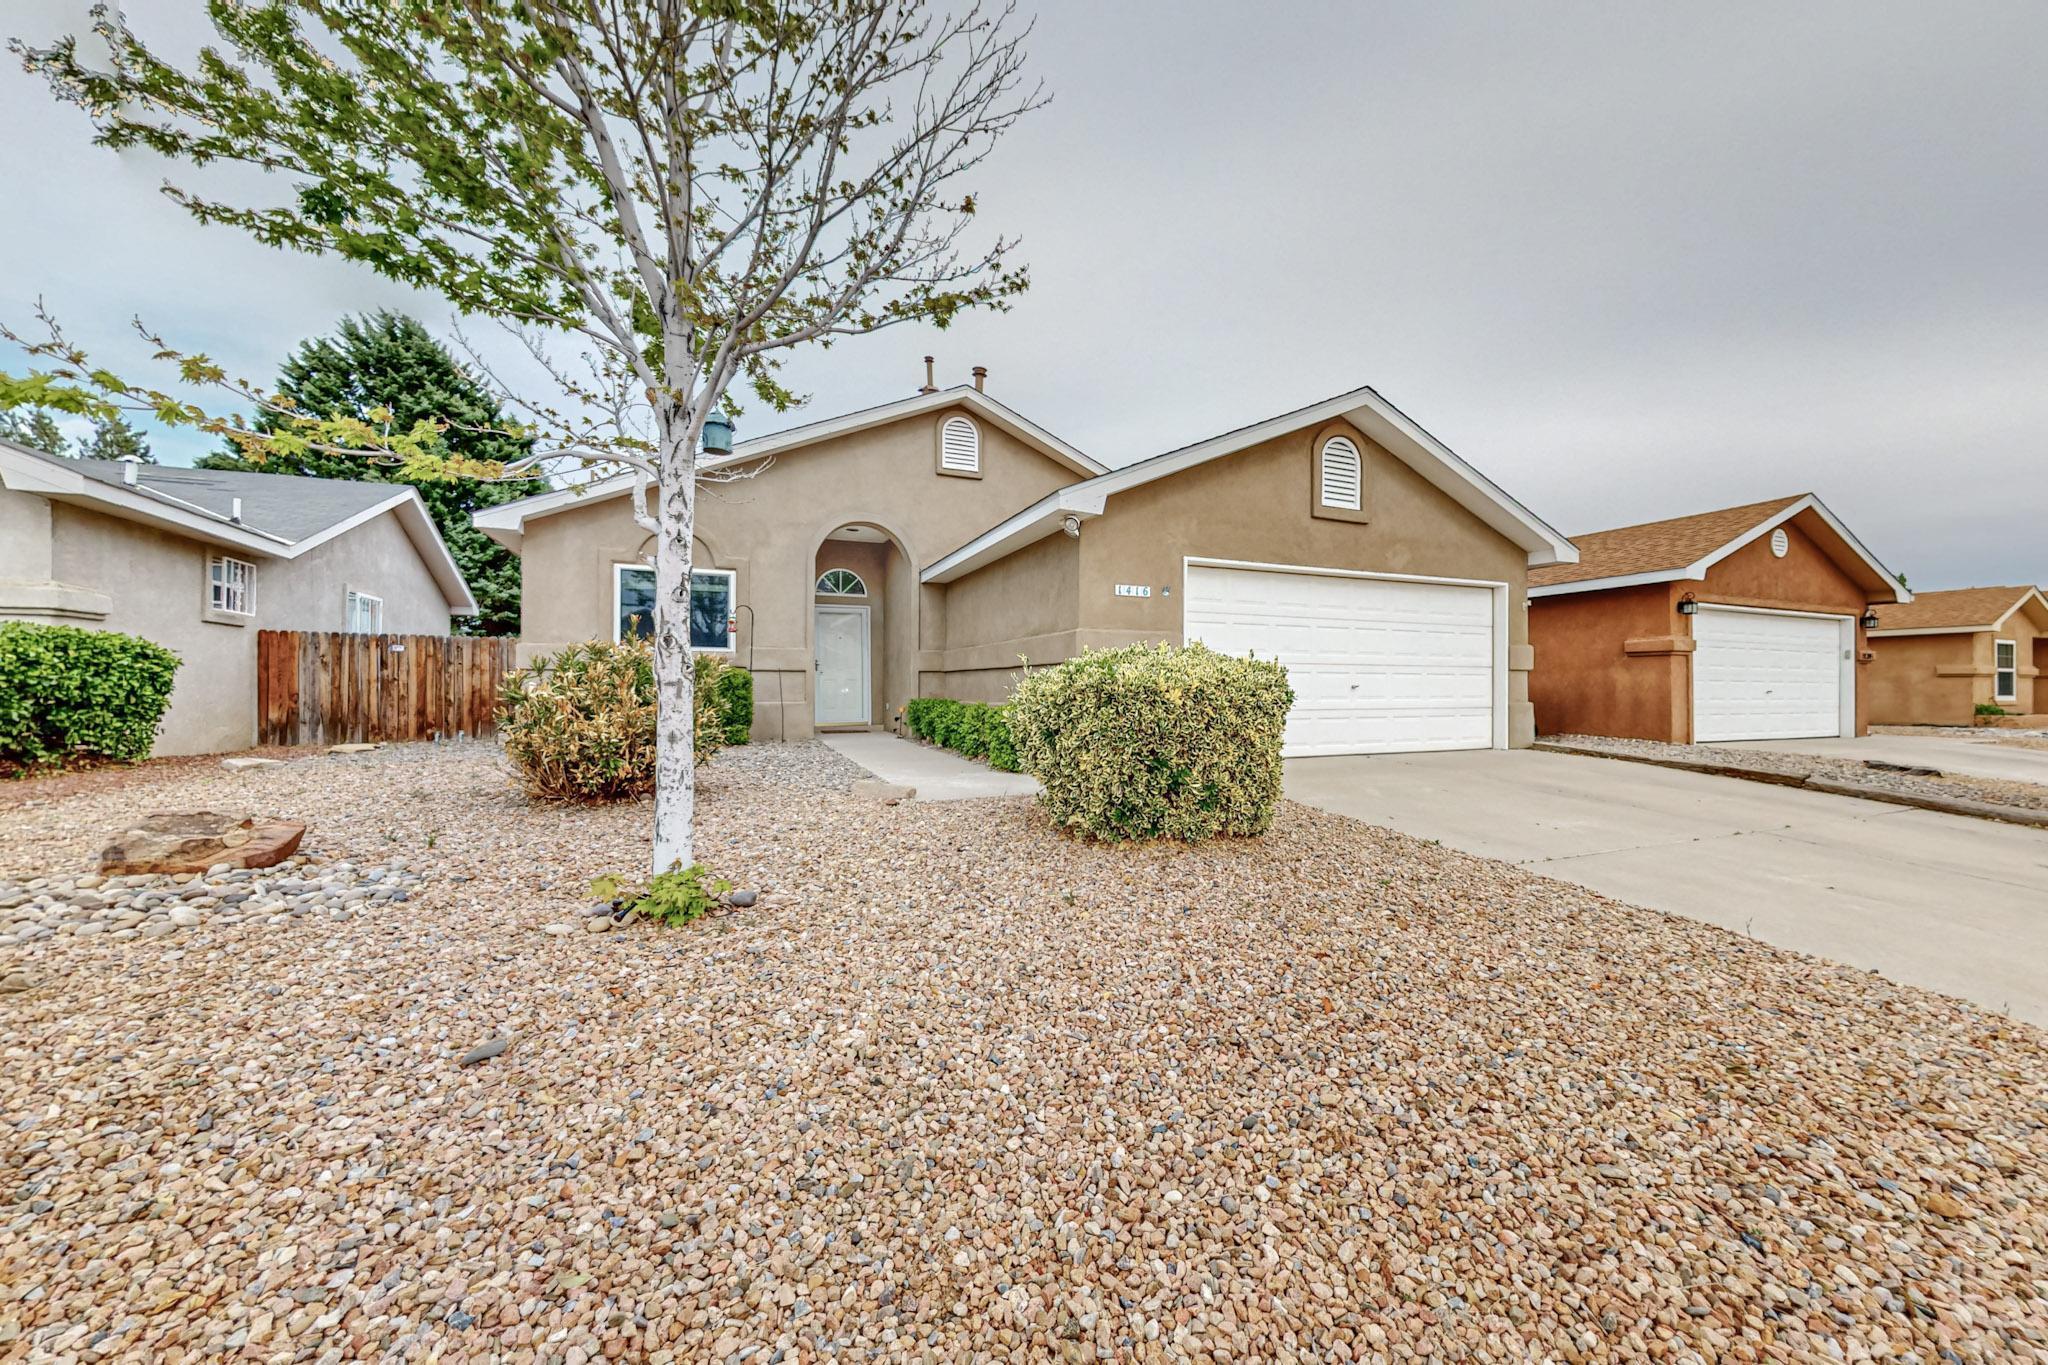 Under 300k and an EPIC location! 3 minutes to the freeway, grocery shopping, urgent care, and restaurants, 8 minutes to the Petroglyphs and less than half a mile to the Westside Aquatic Center! You'll find just what you need with these 3 bedrooms and 2 full bathrooms. The kitchen has bar top seating and lots of counter space and the laundry is big enough to double as a pantry. This home is ready for you to make your own with custom paint throughout and an incredibly efficient floor plan. The backyard is starting to bloom - with purple lilac, hummingbird bushes and Spanish broom. With this west facing home you can enjoy evenings year-round on the covered back patio. Schedule a showing today!